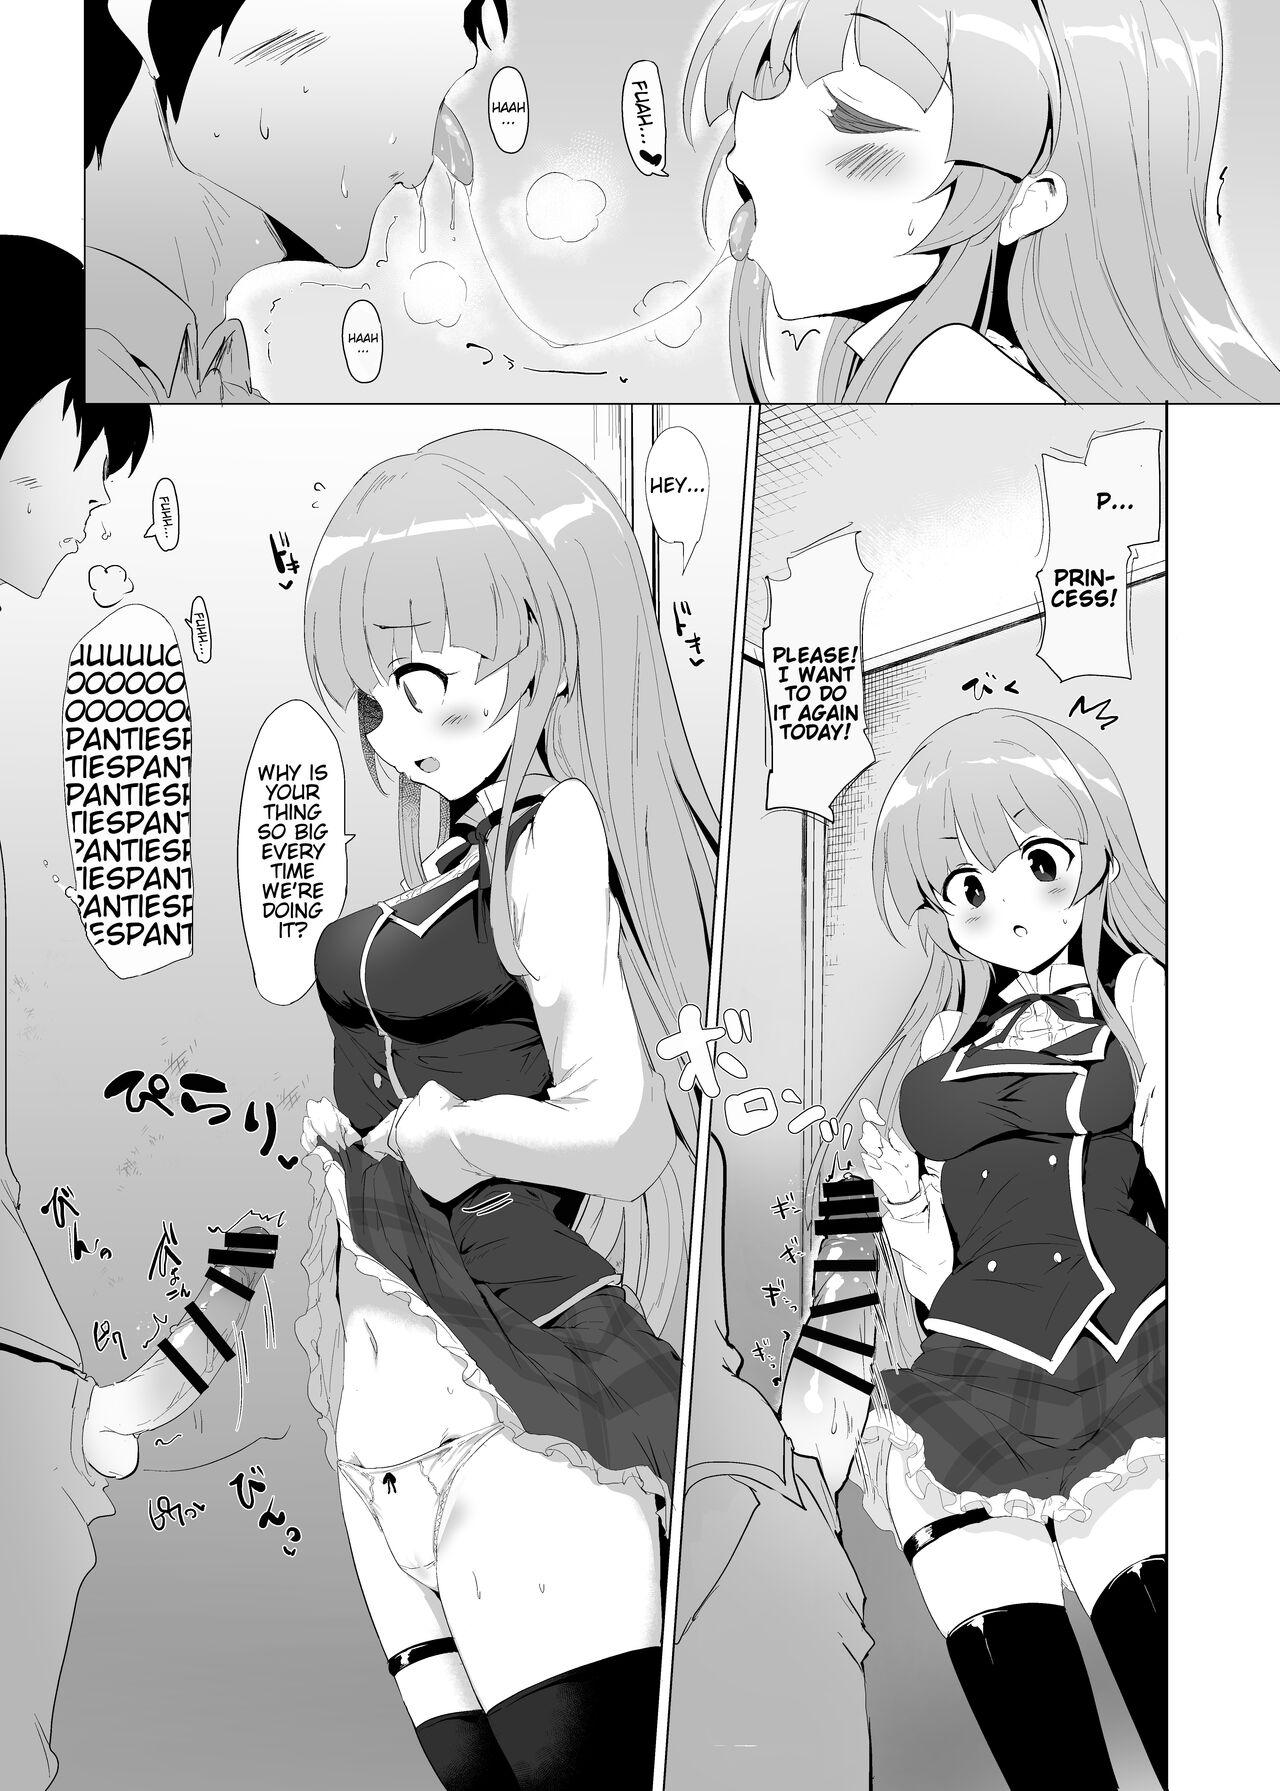 Tits There's No Way An Ecchi Event Will Happen Between Me and the Princess of Manaria Kingdom! 2 - Manaria friends Cocksuckers - Page 7